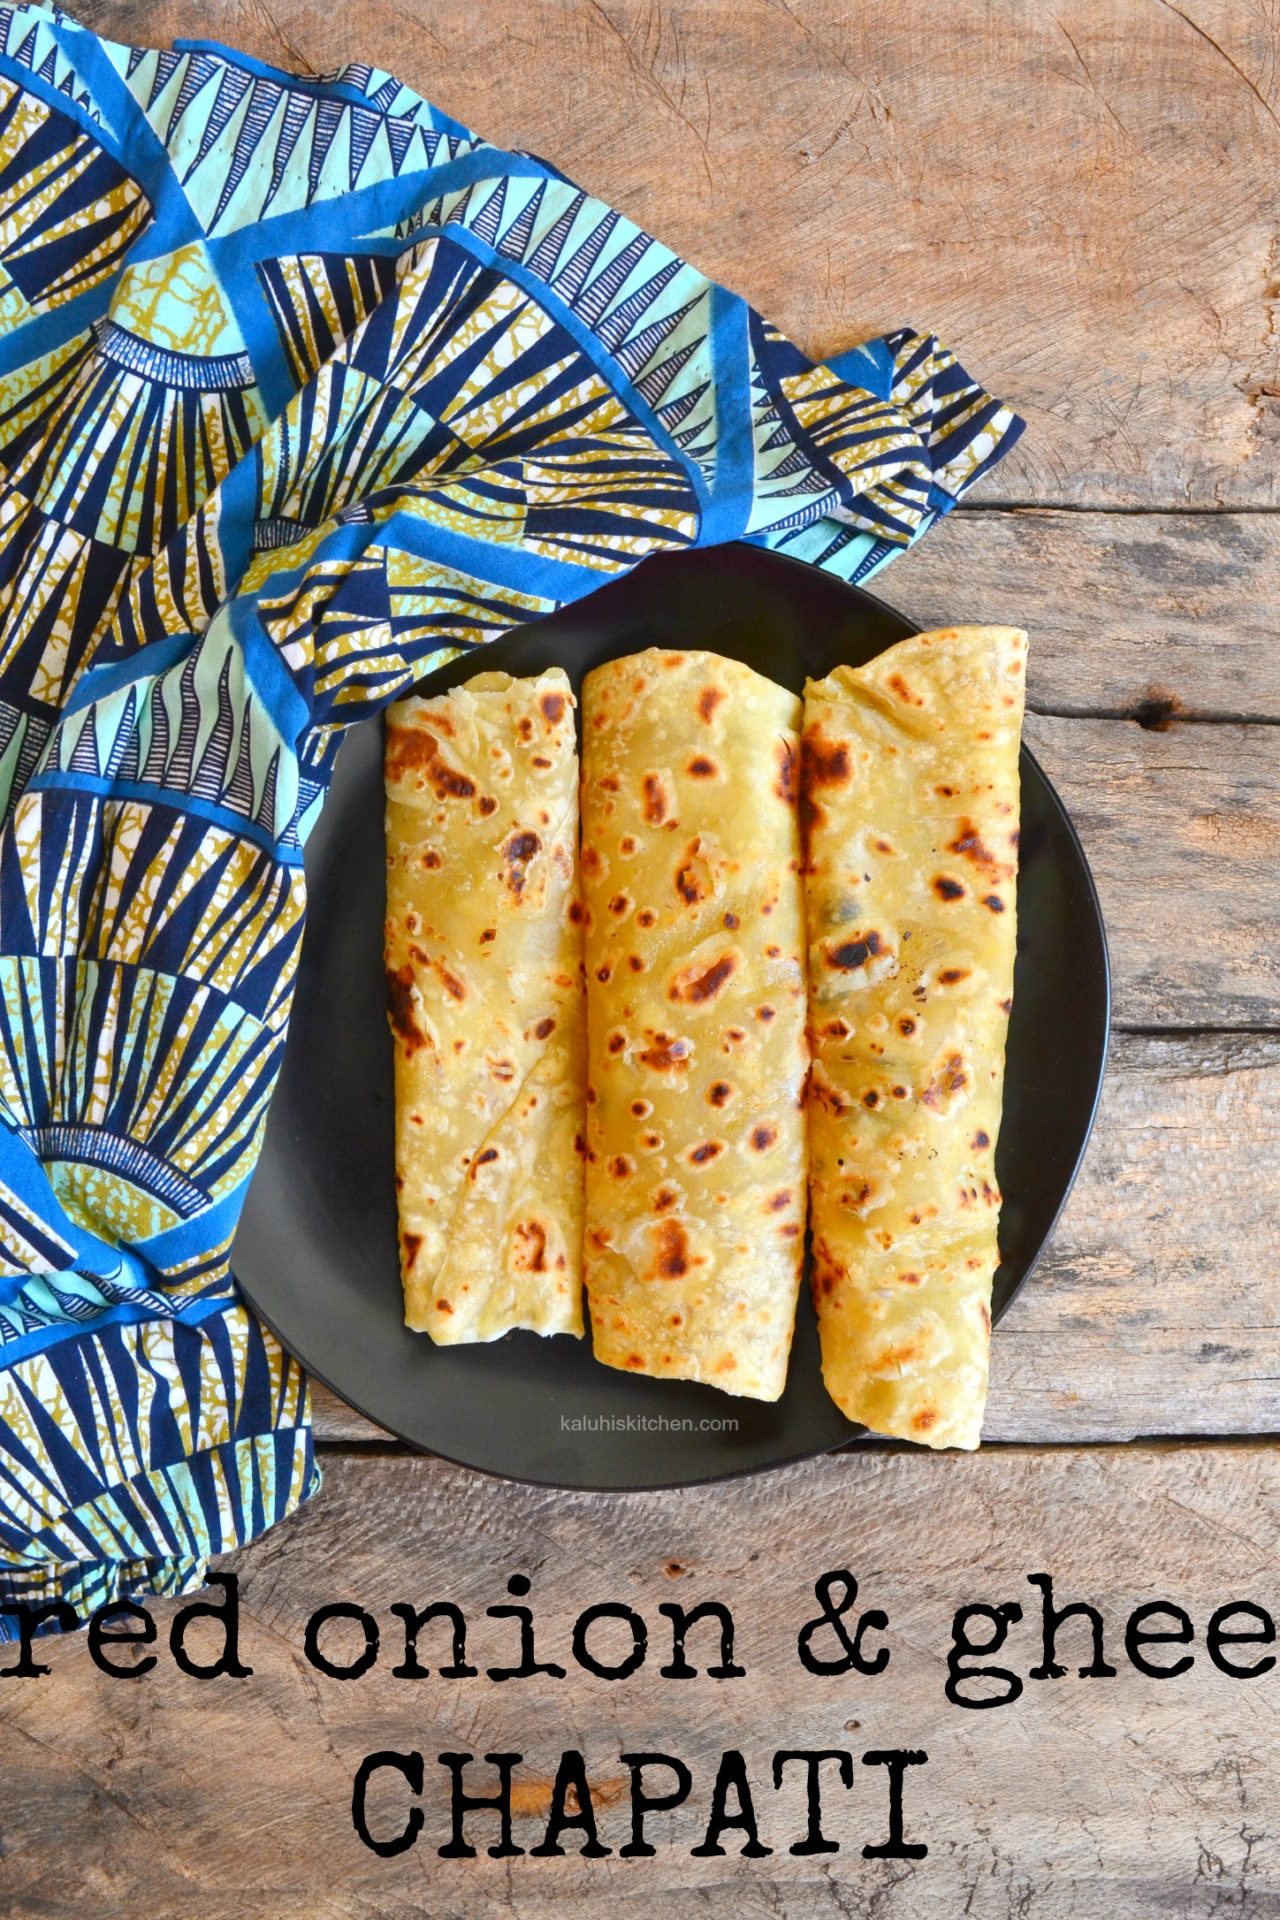 food blogs in kenya_kenyan food bloggers_best food blogs in Africa_african food bloggers_how to make chapati_red onion and ghee chapati